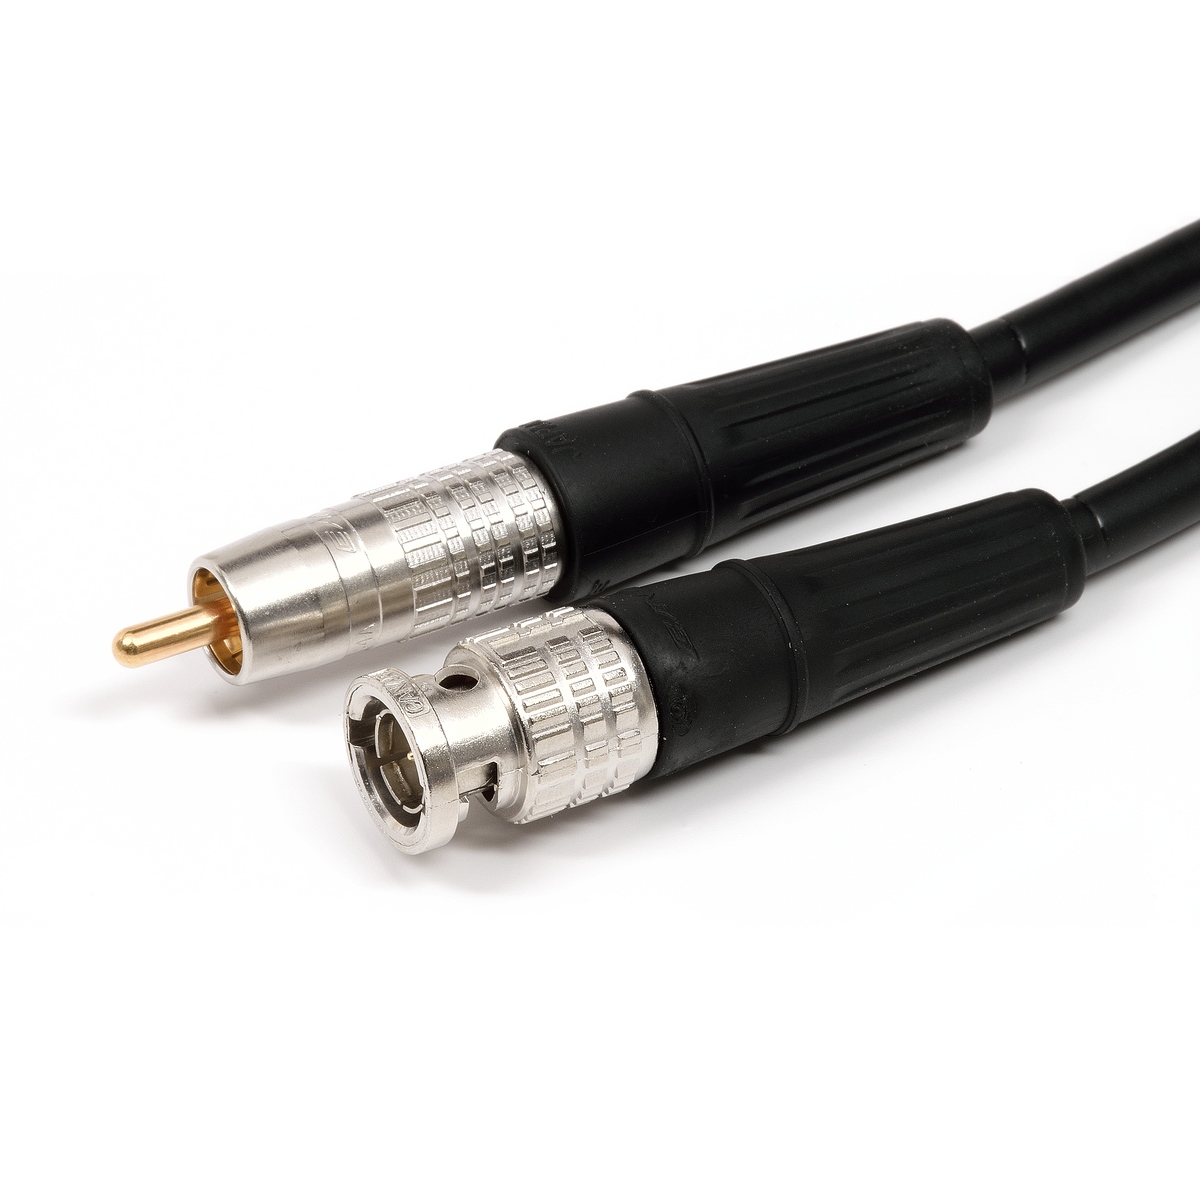 Benchmark BNC to RCA Adapter Cable - ends